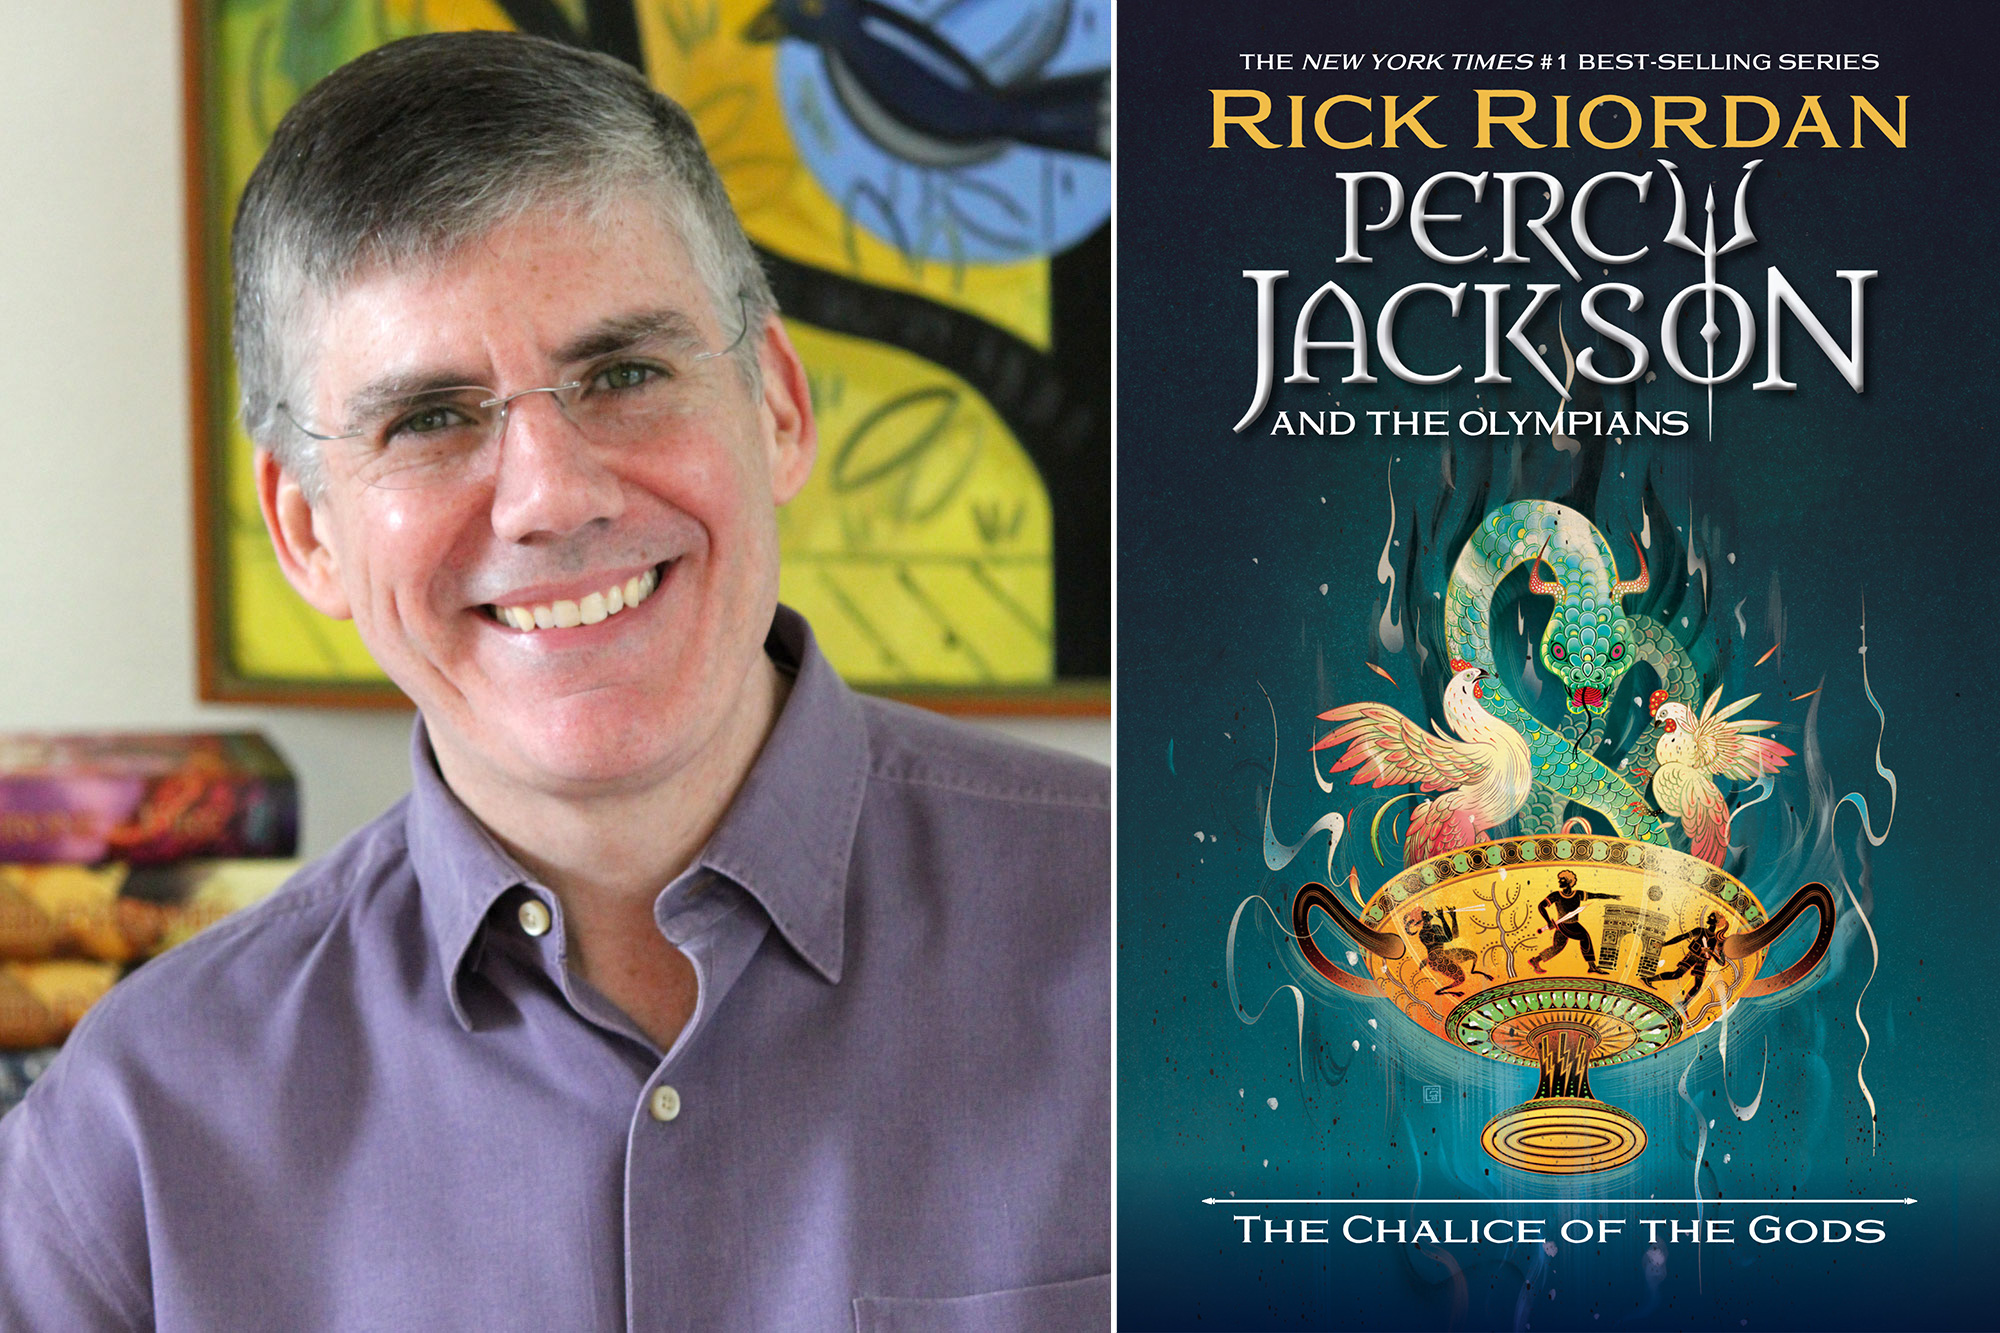 THE TONIGHT SHOW STARRING JIMMY FALLON, Percy Jackson and the Olympians The Chalice of the Gods by Rick Riordan